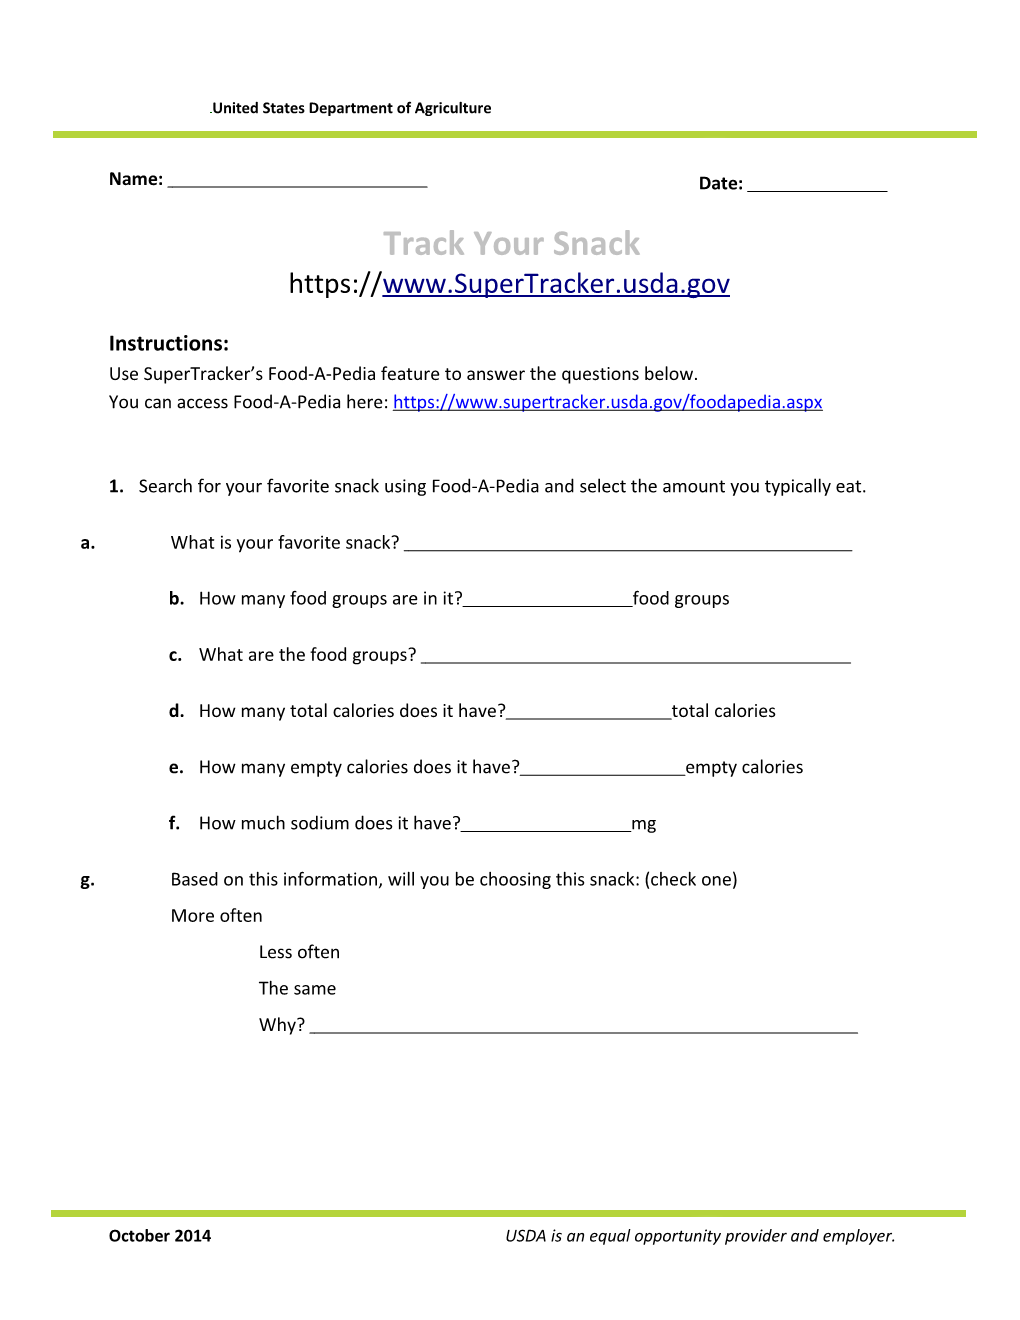 Supertracker Nutrition Lesson Plans for High School Students